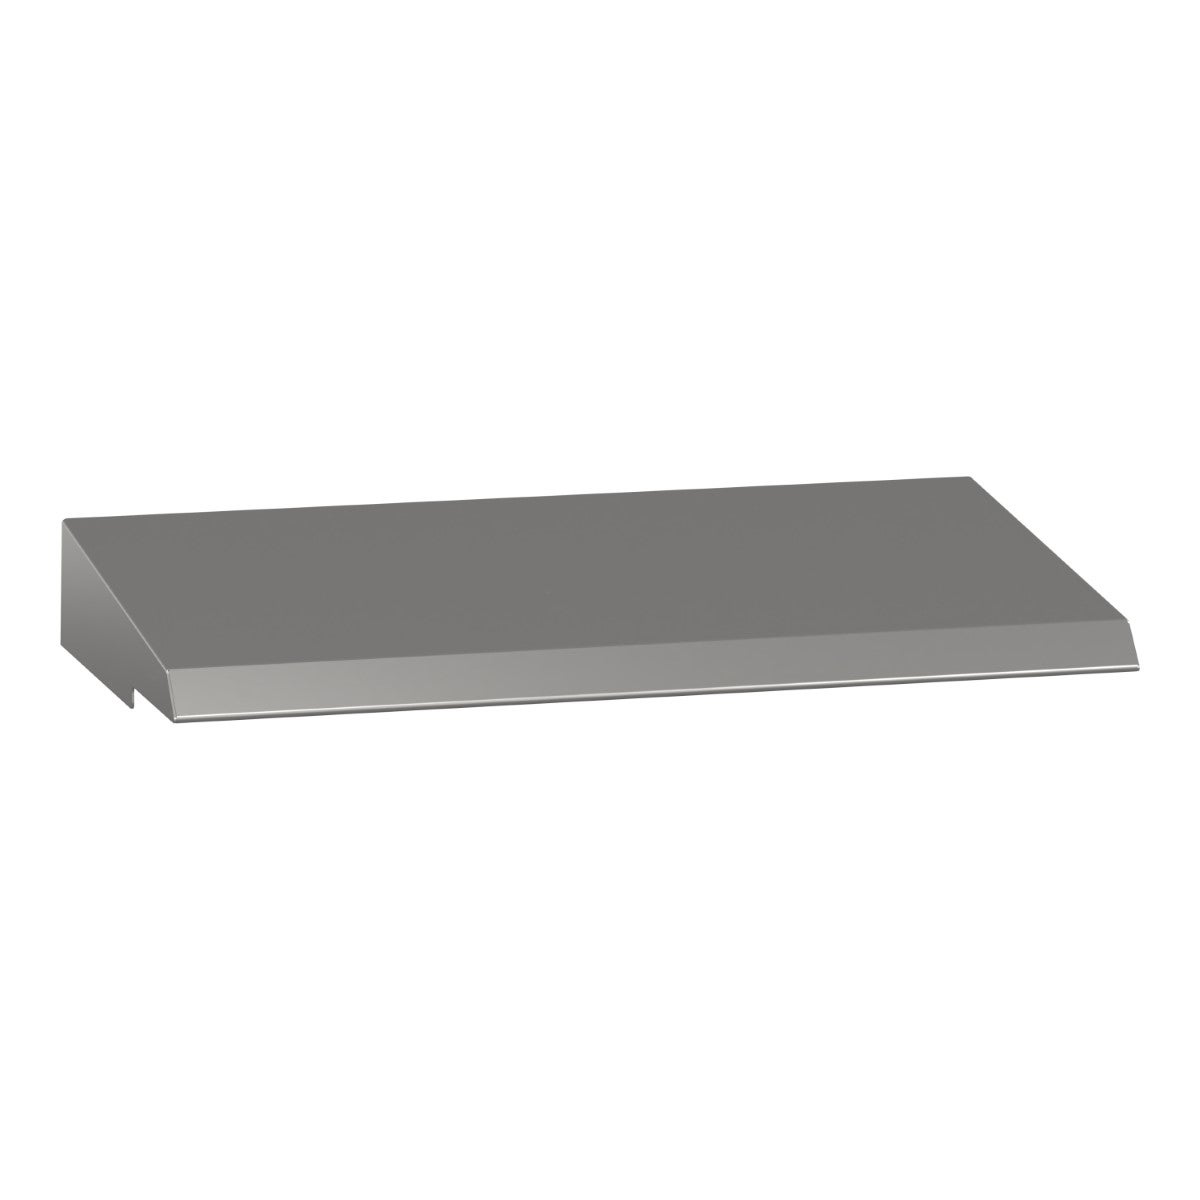 Stainless canopy 304L, Scotch Brite� finish. for WM enclosure W400xD200mm